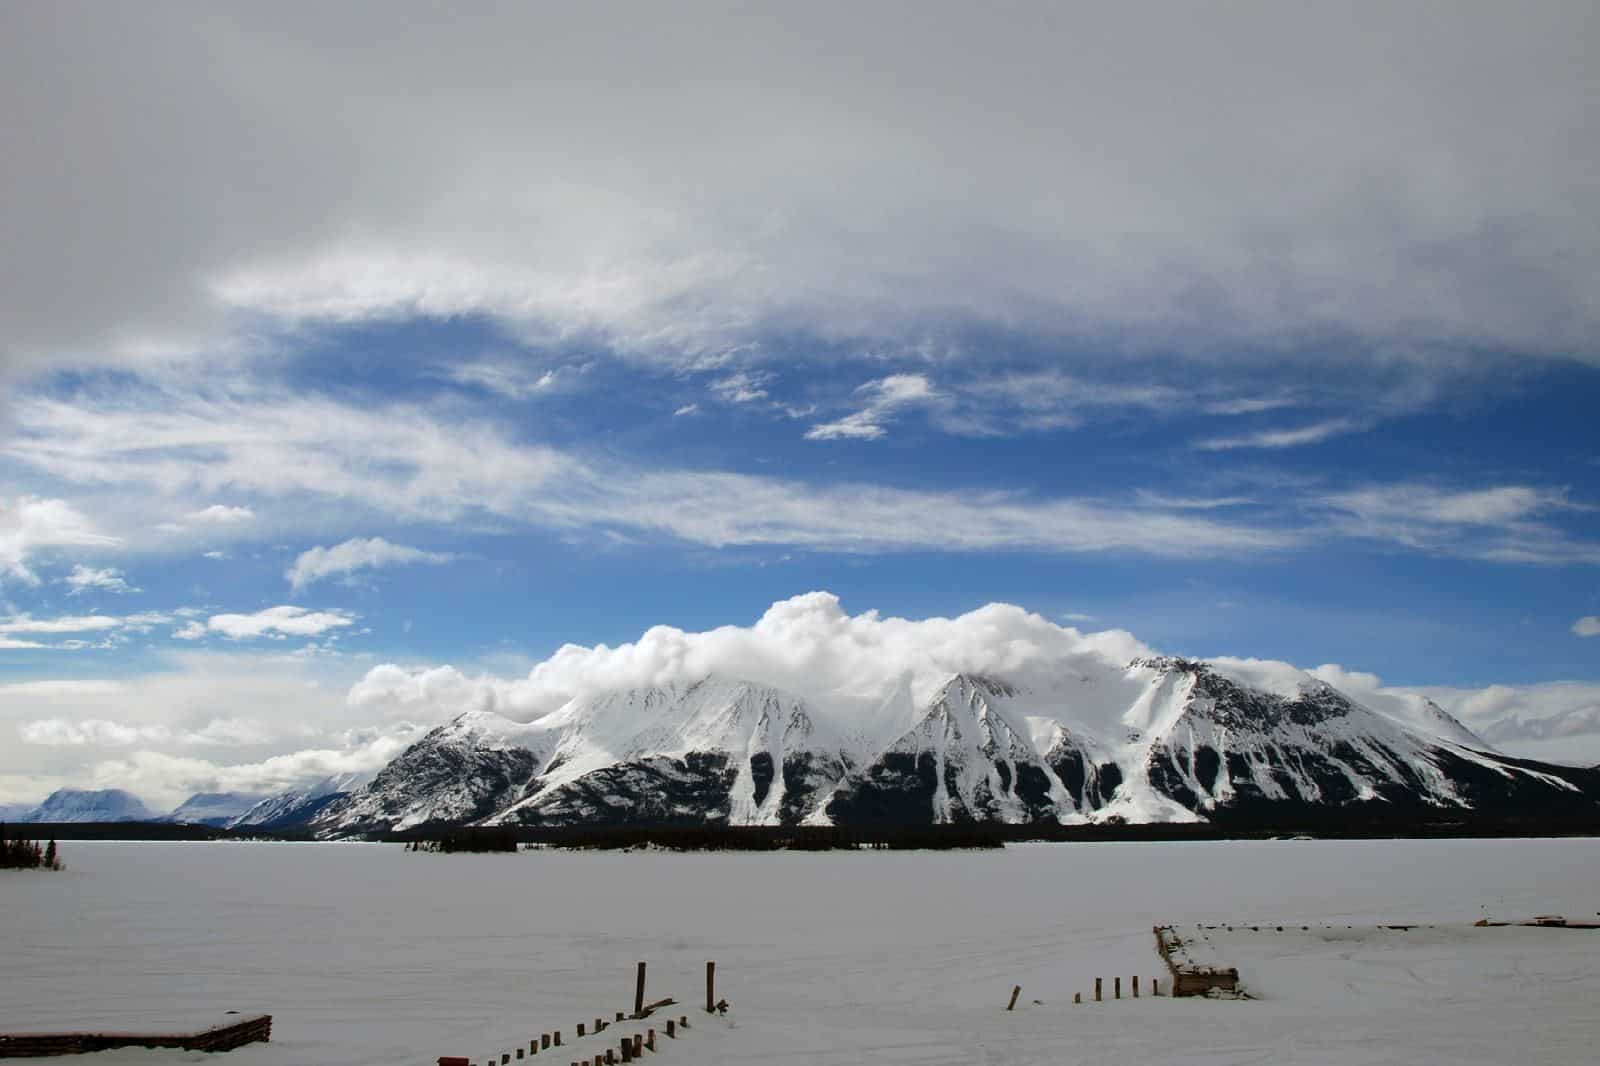 Photograph of Atlin lake in the winter